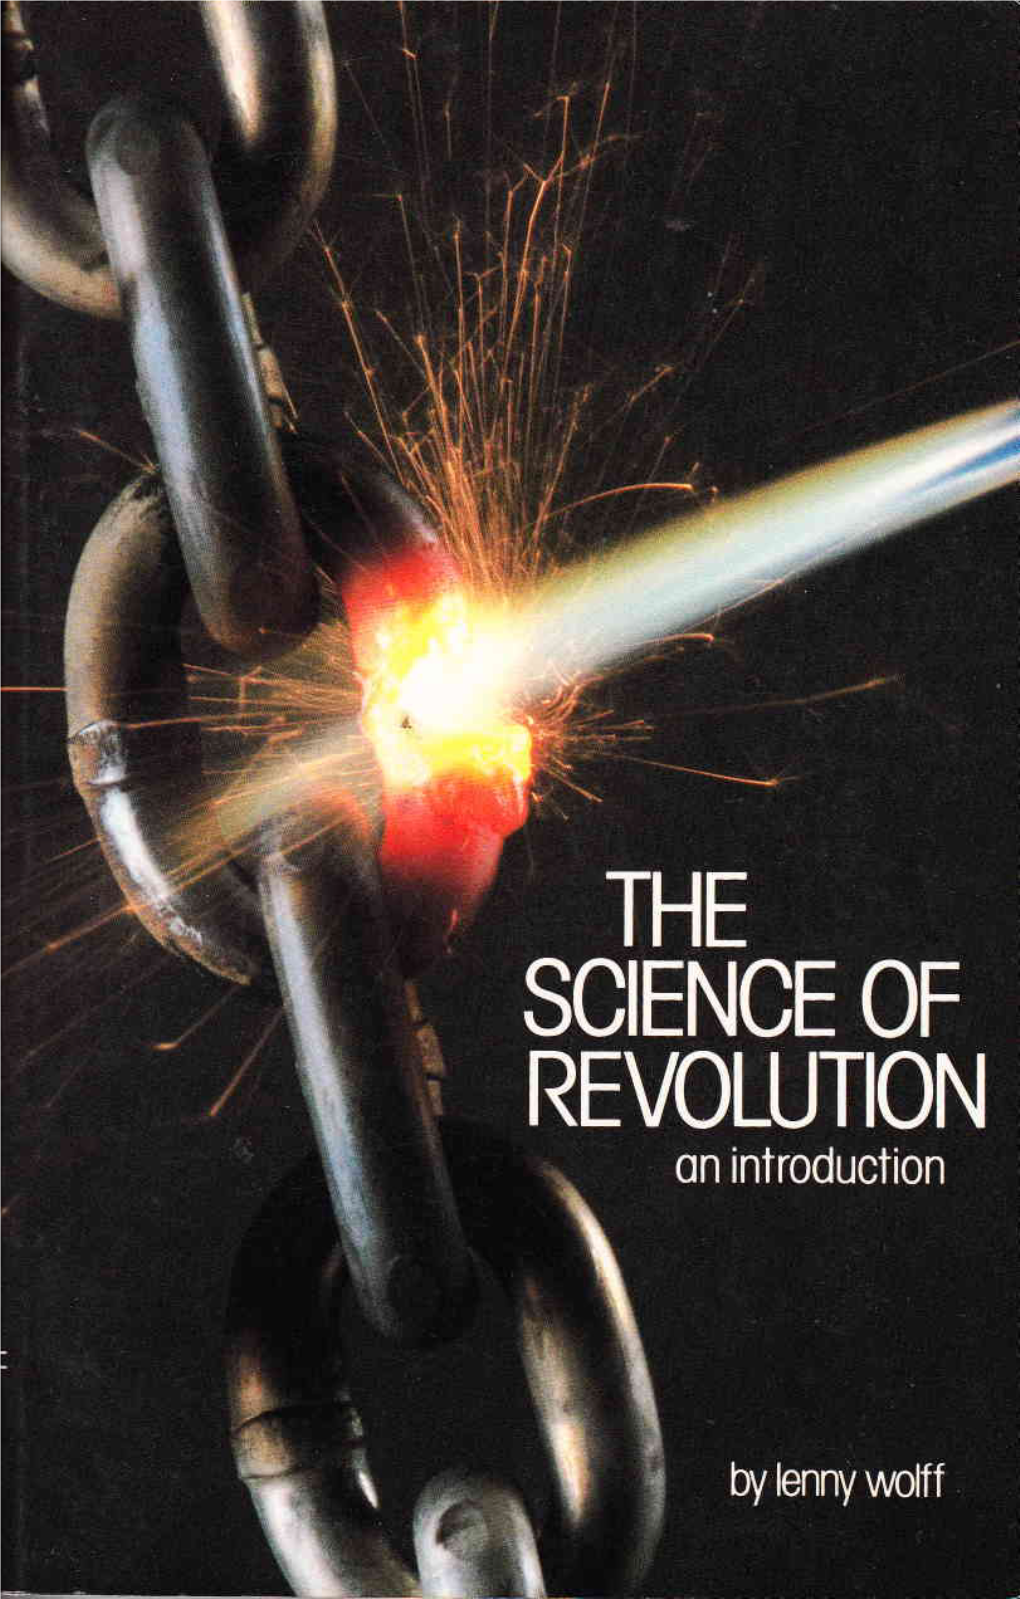 THE SCIENCE of REVOLUTION on Introduction